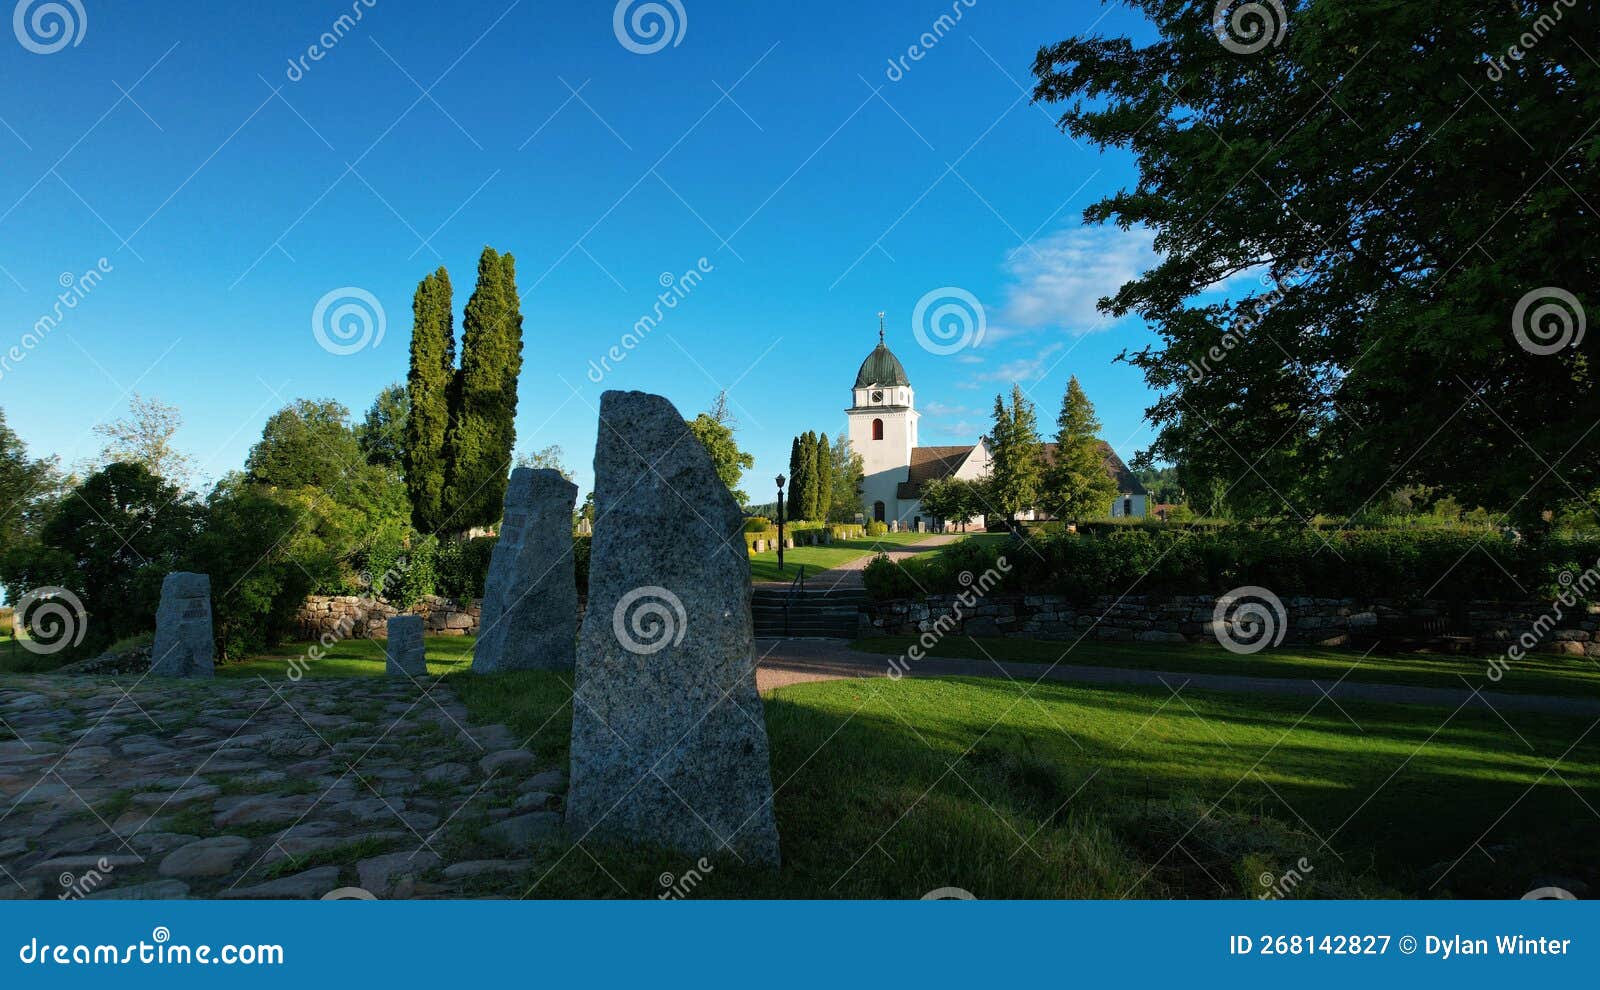 church of sweden and the vasa monument in rattvik in sweden